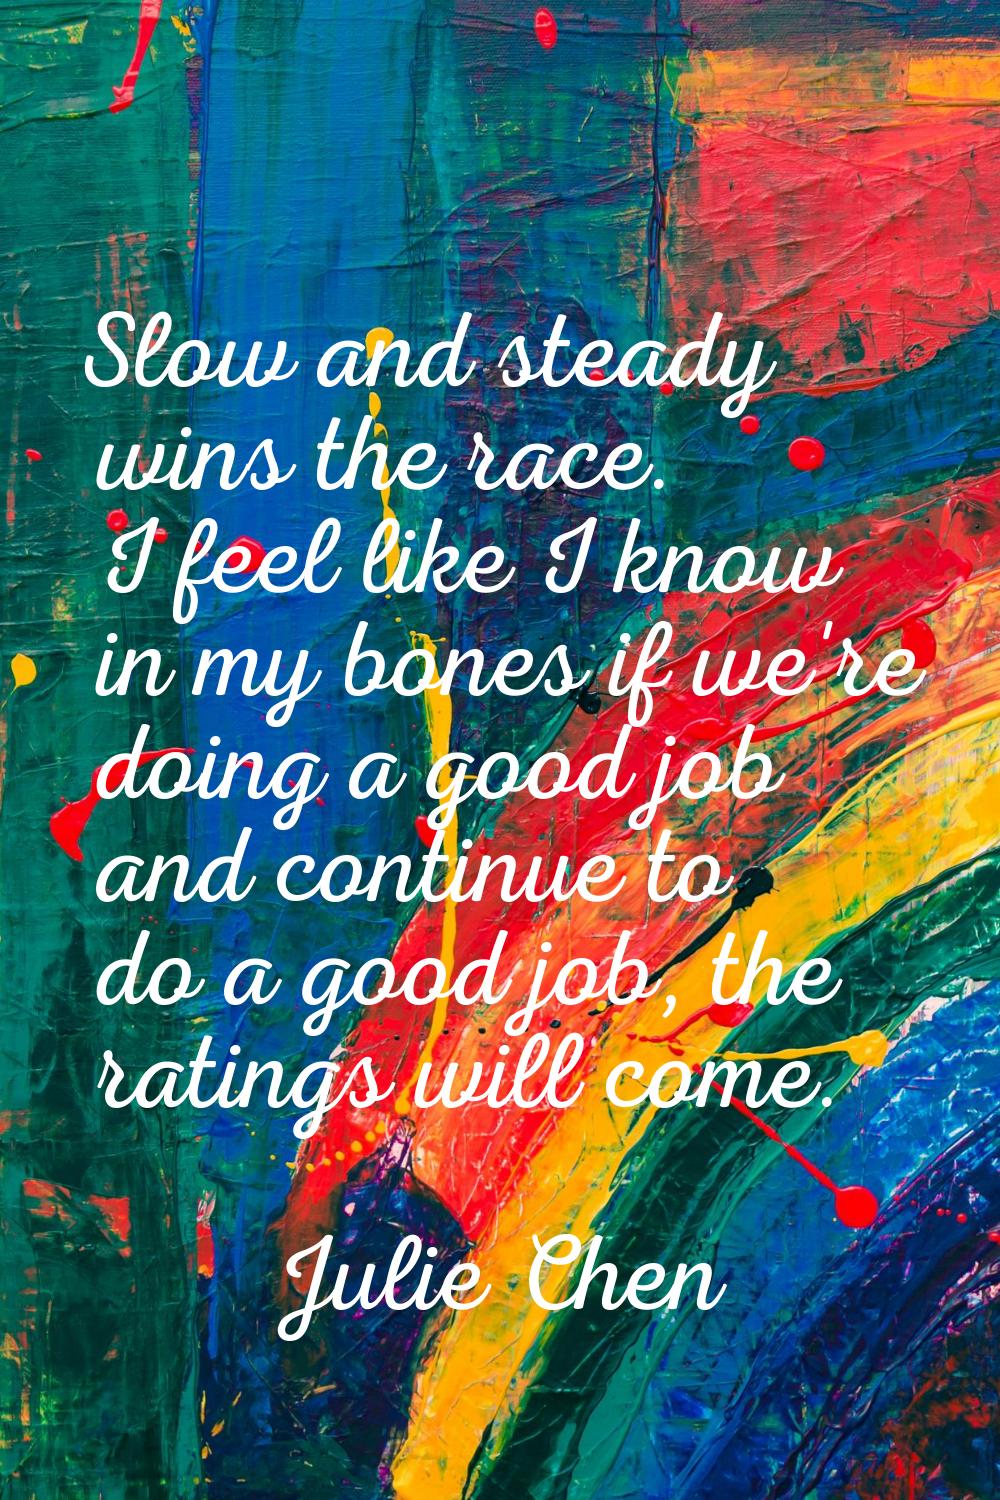 Slow and steady wins the race. I feel like I know in my bones if we're doing a good job and continu